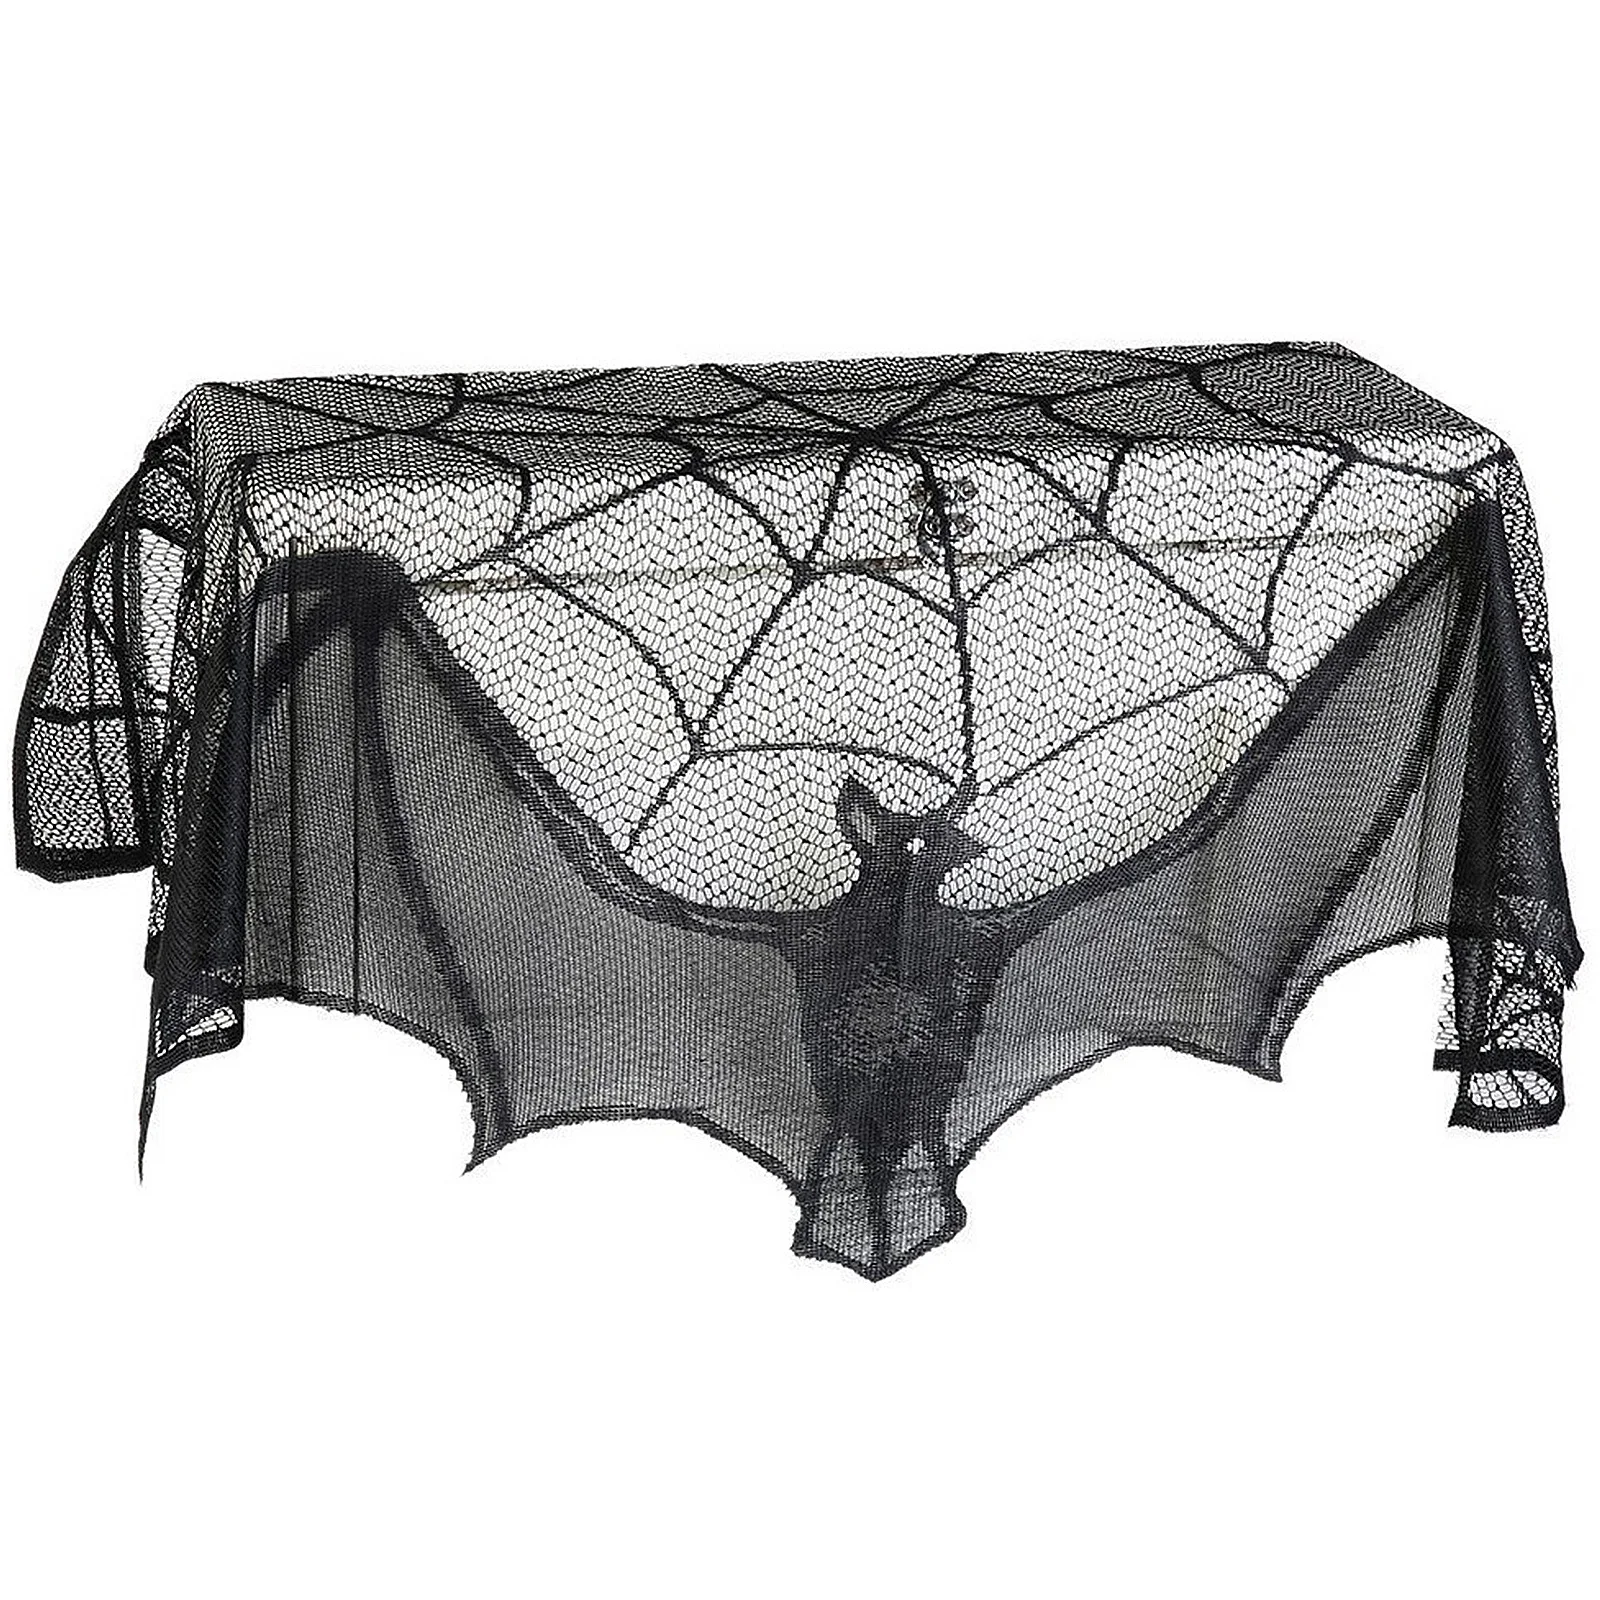 Halloween Tablecloth Table Runner Table Flag Decoration Lace Knitted Spider Web Fireplace Mantle Home Kitchen Party Supply